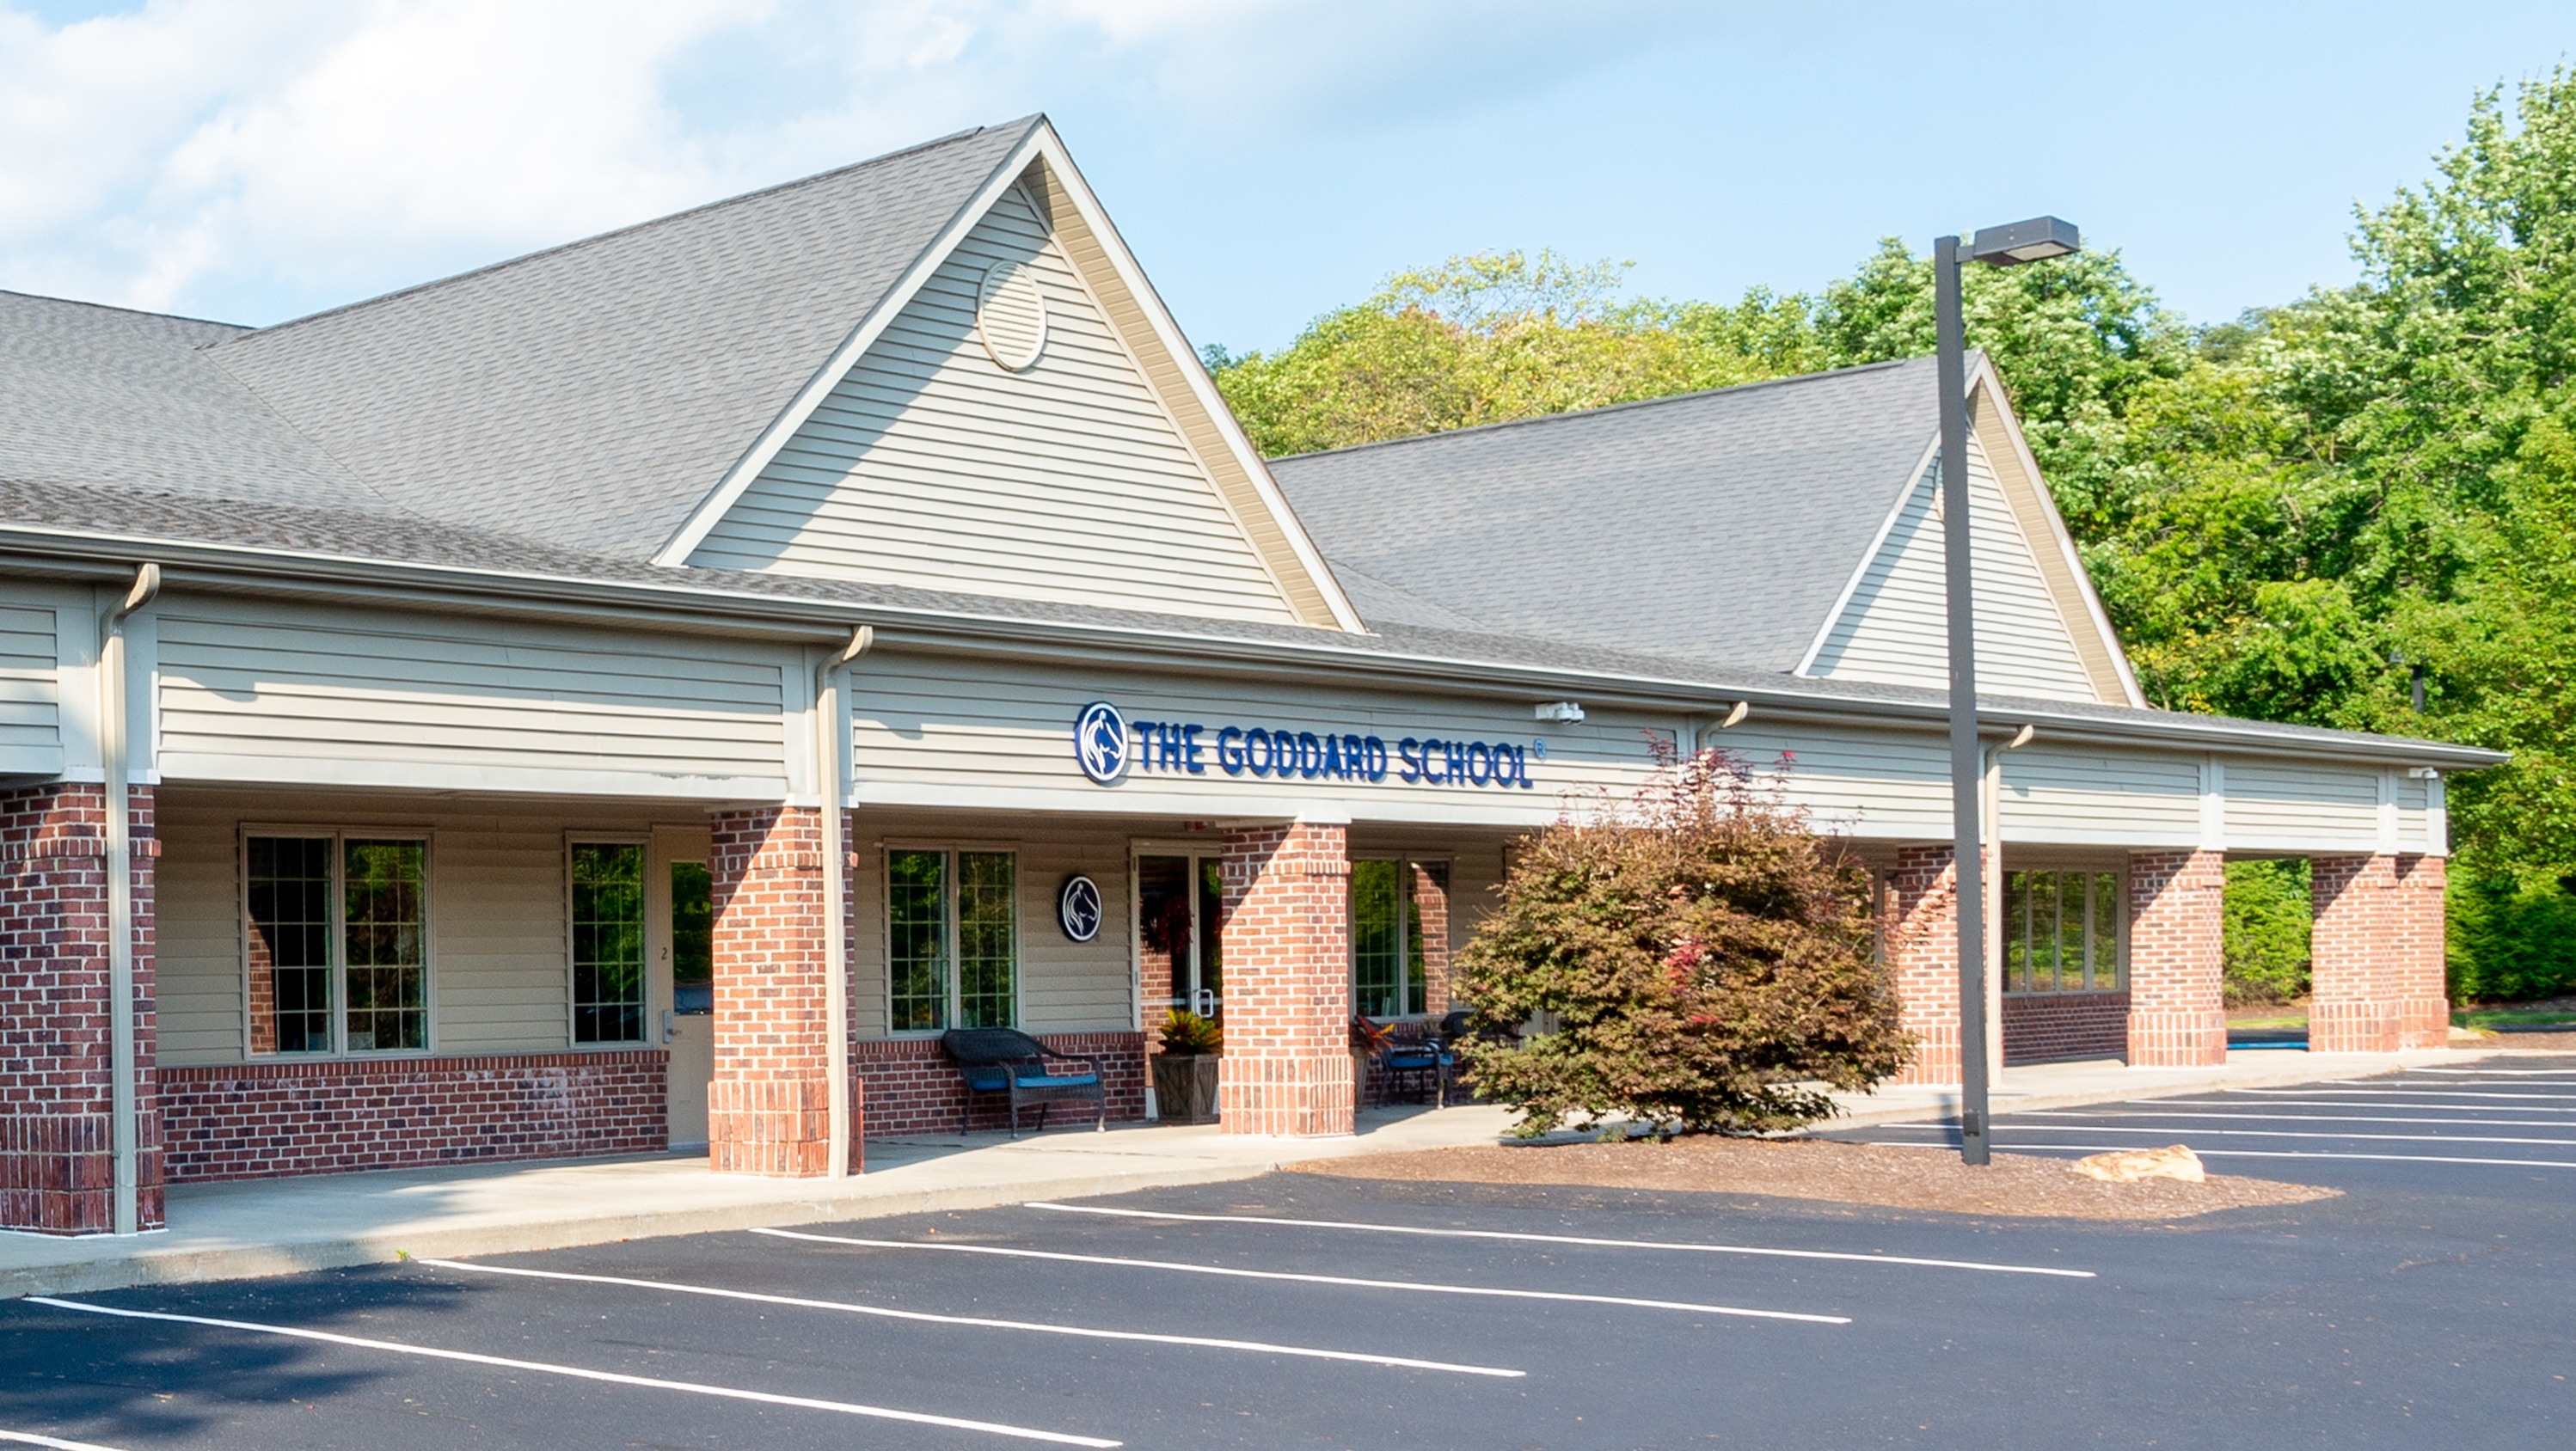 Image 2 | The Goddard School of Cranberry Township